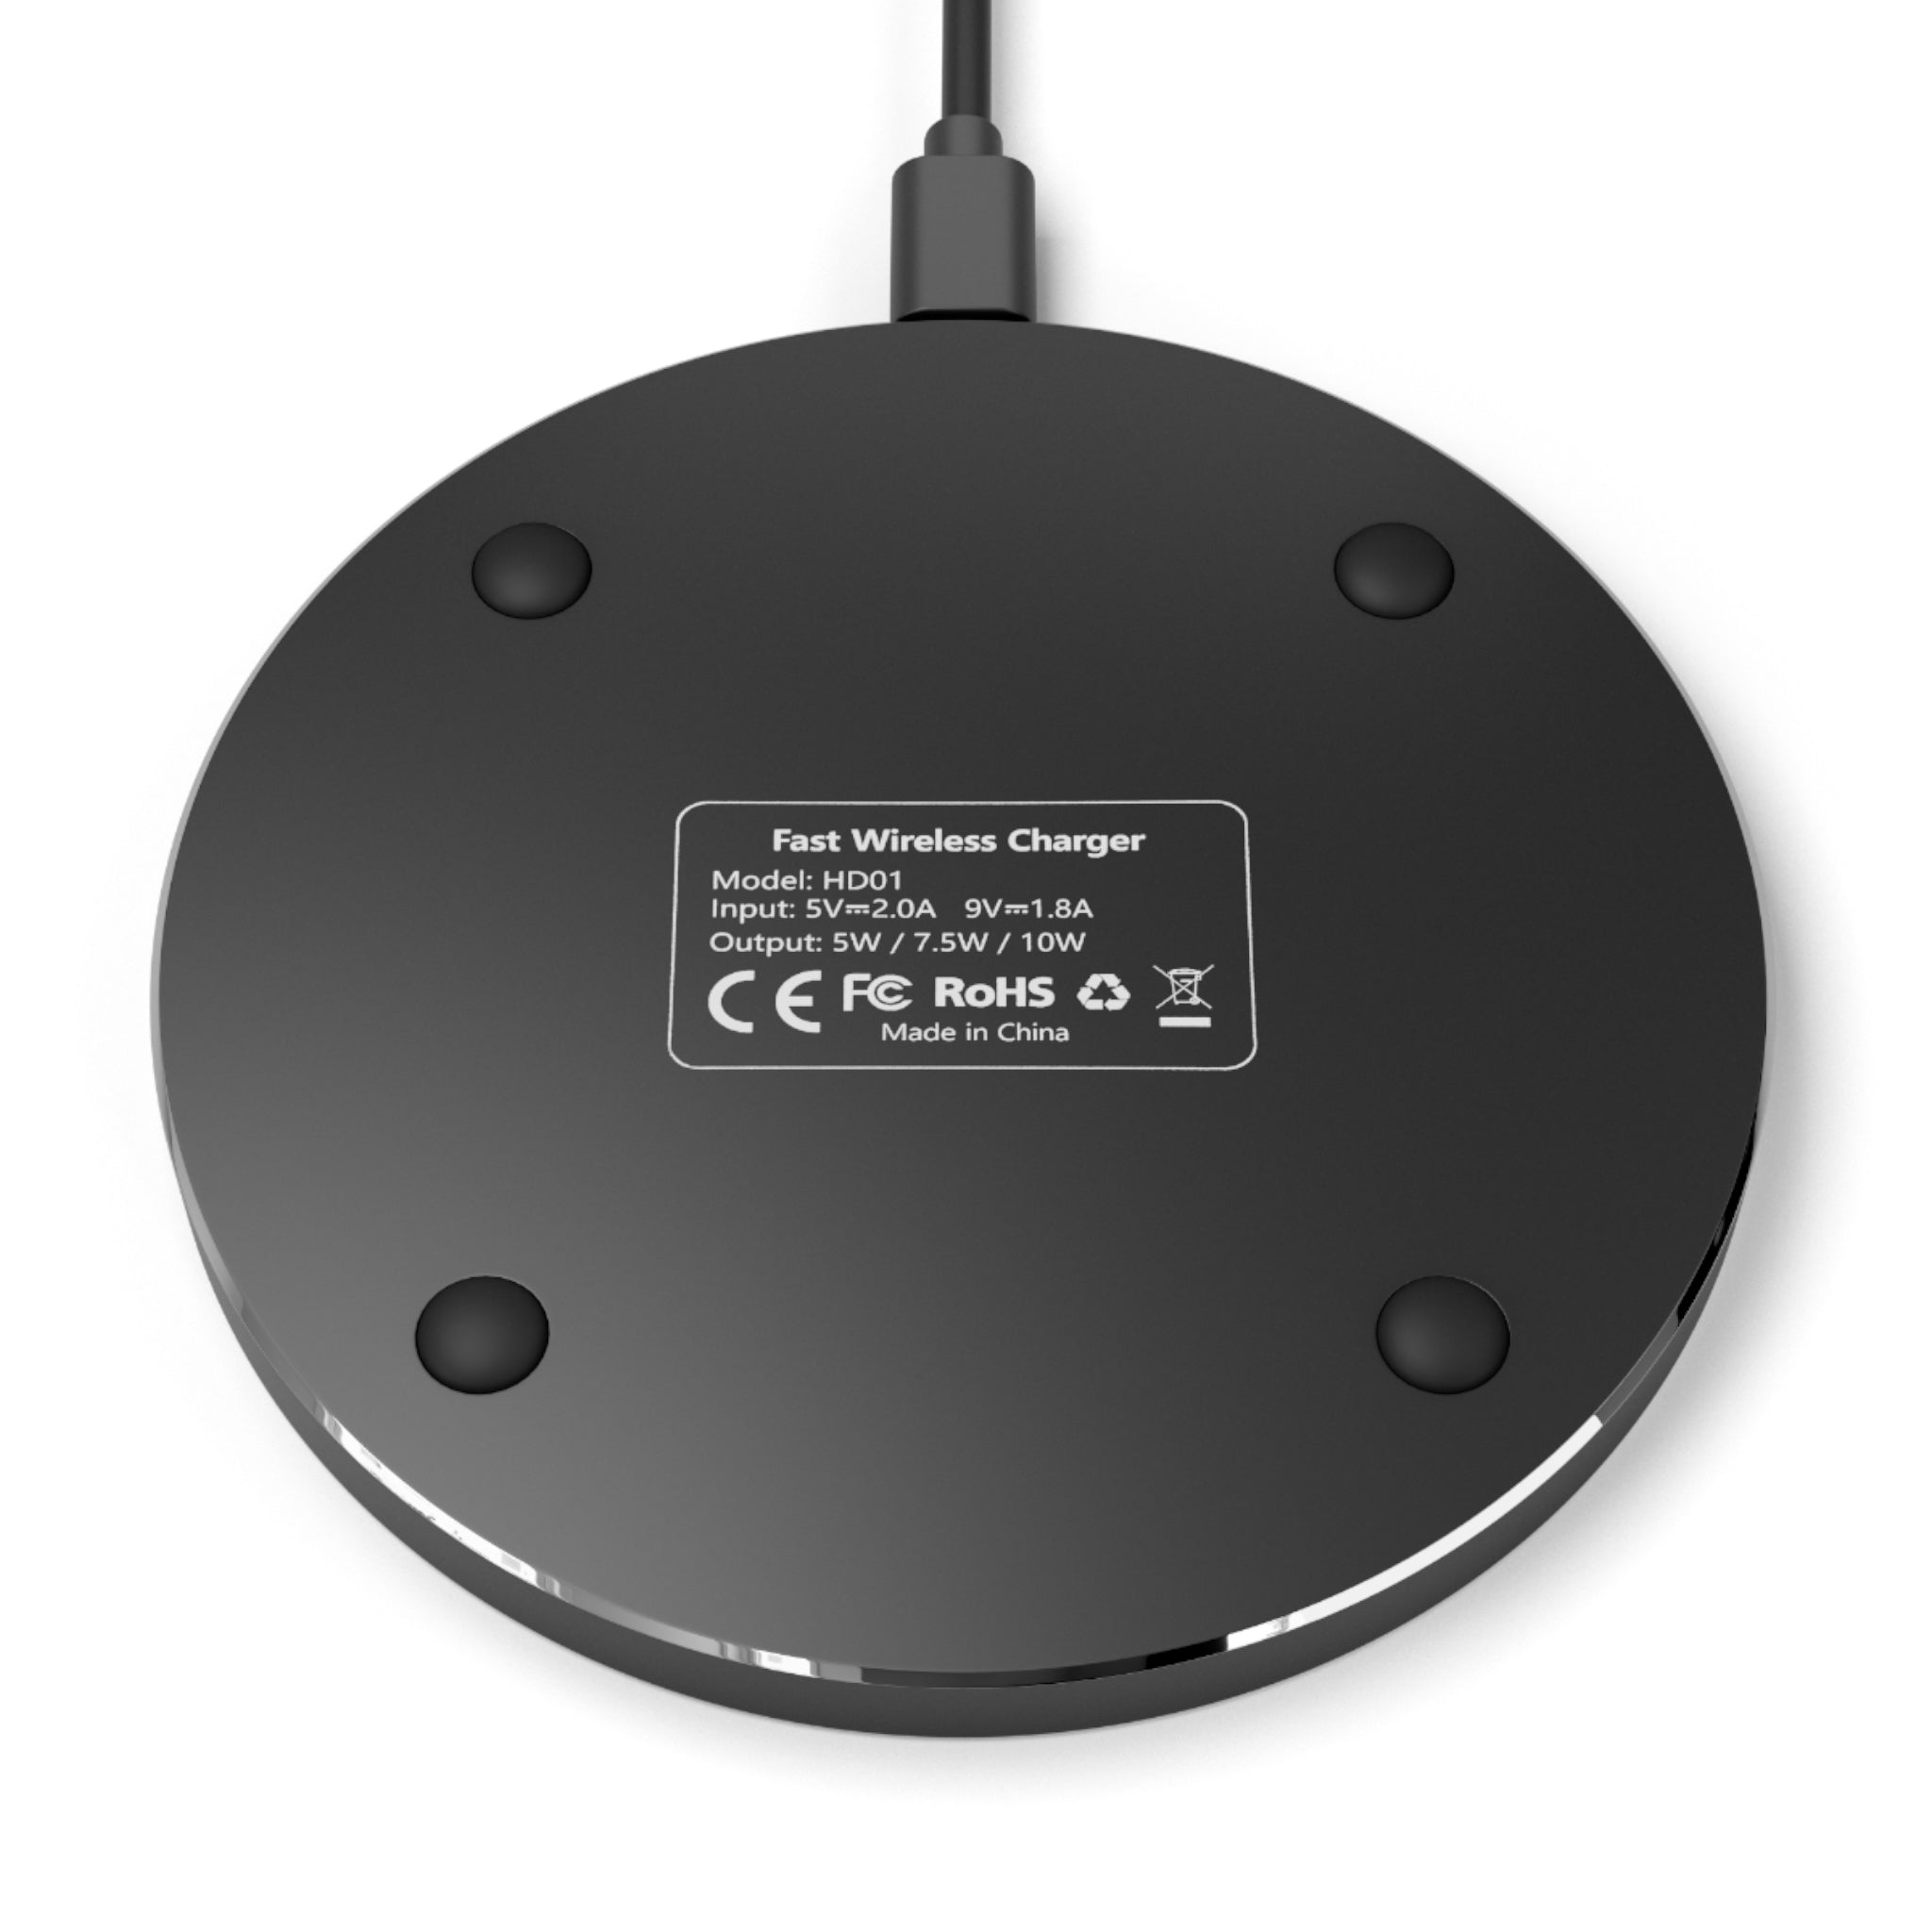 Lost in Space Wireless Charger